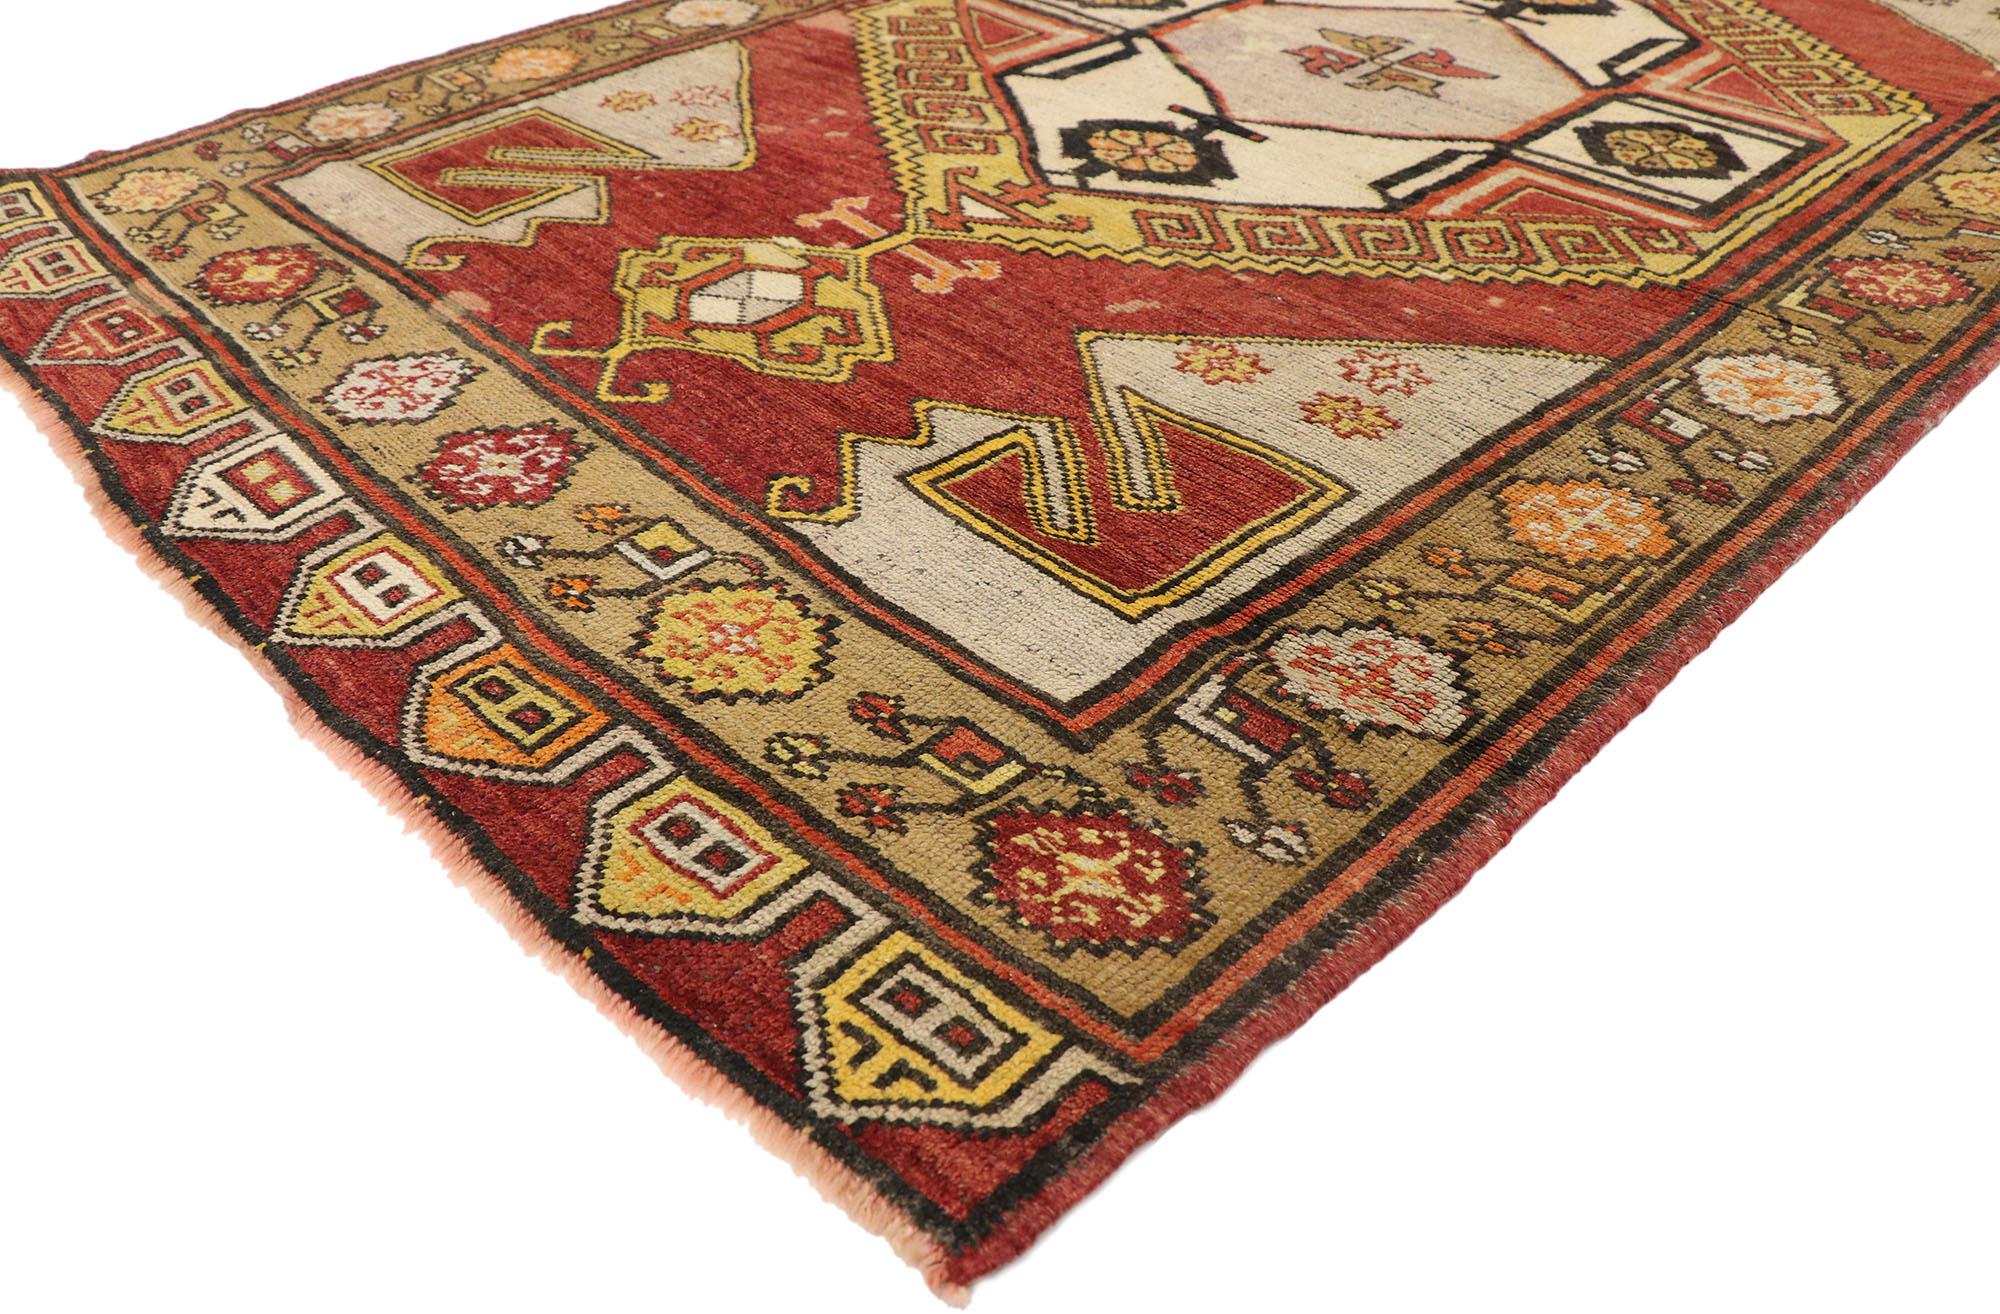 73938 Vintage Turkish Oushak Runner, 04'00 X 11'08. Nomadic charm collides with rugged beauty in this hand knotted wool vintage Turkish Oushak rug. The eye-catching tribal design and lively colorway woven into this piece work together creating a